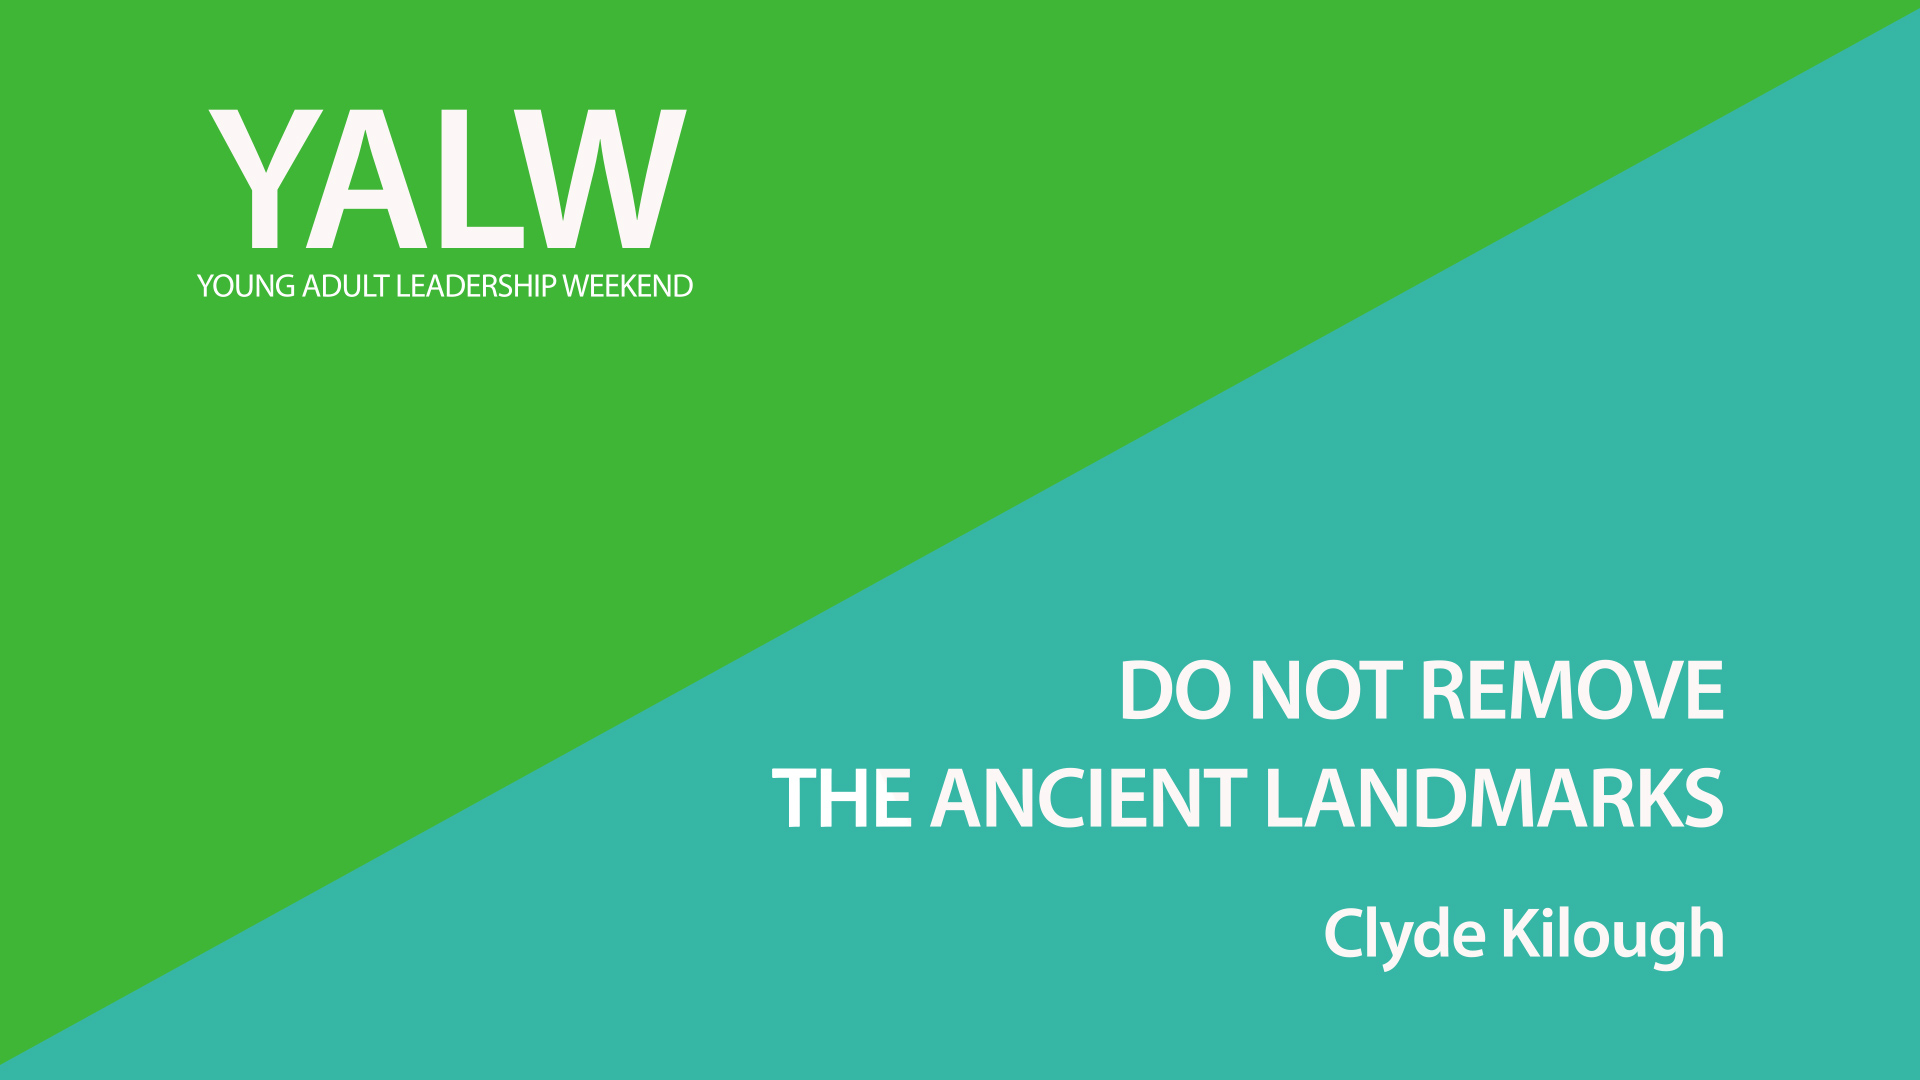 Do Not Remove the Ancient Landmarks